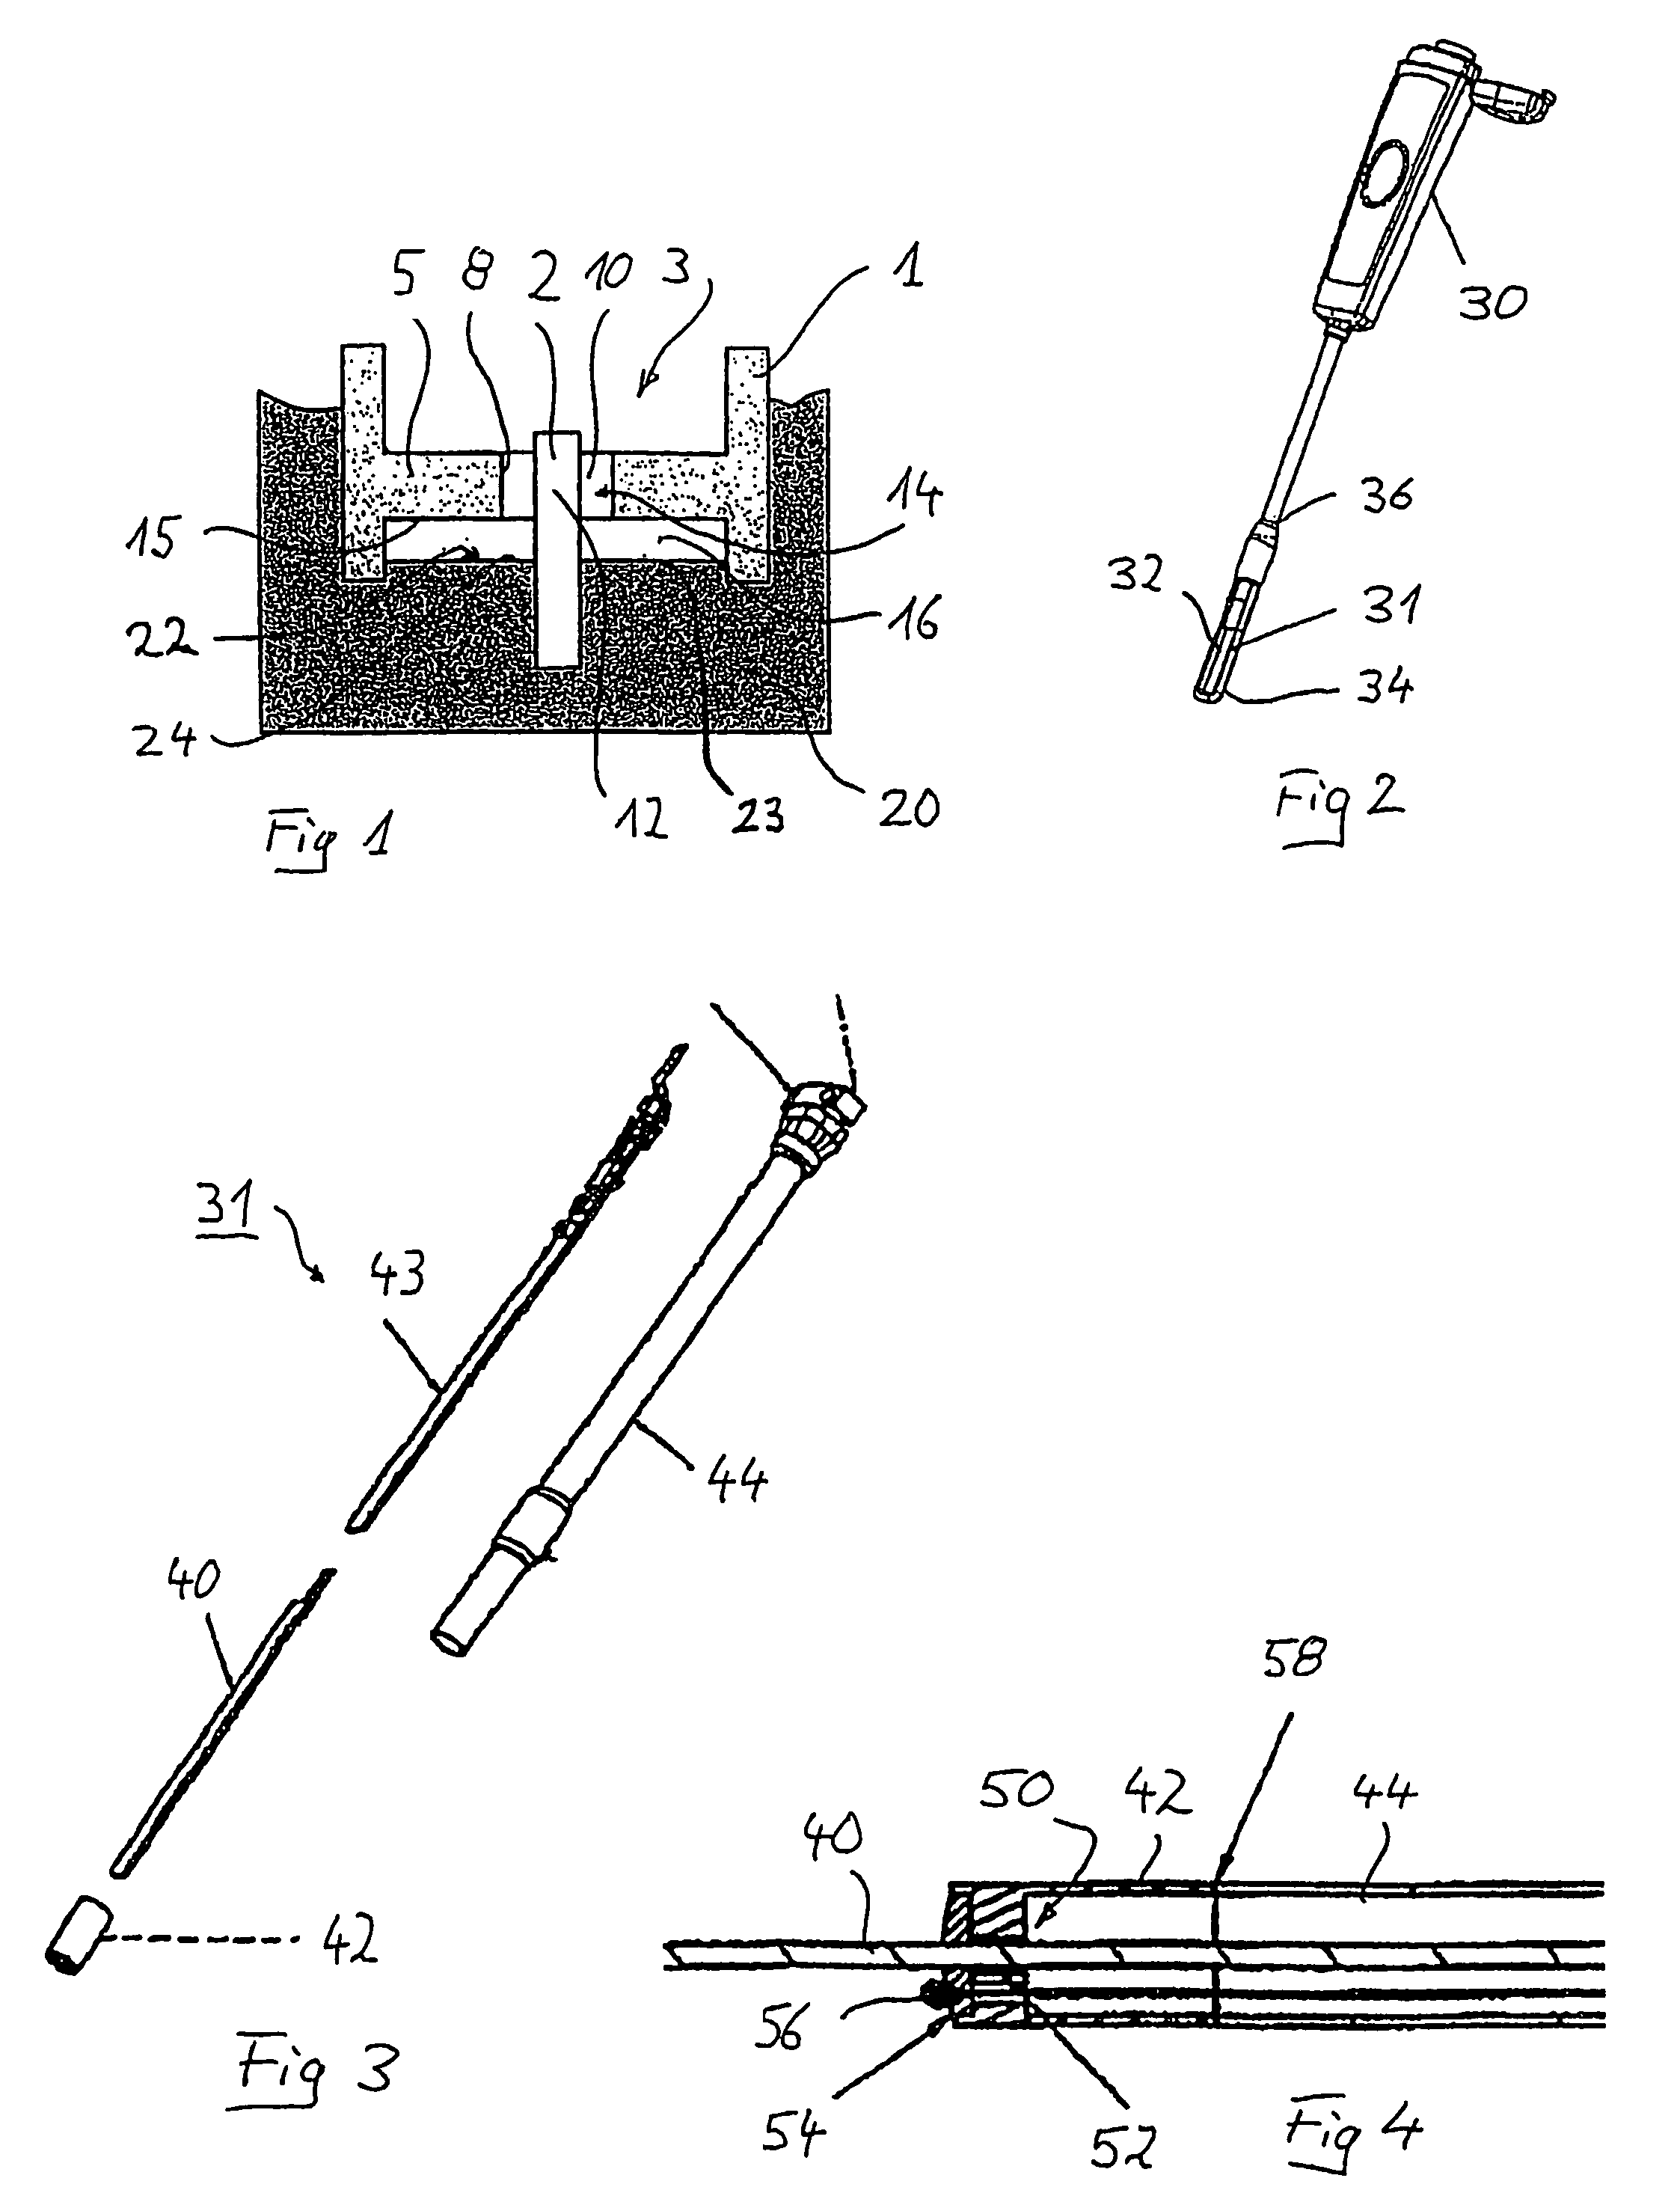 Thermally stable and liquid-tight joint between a first ceramic, metal, or plastic component and a second ceramic, metal or plastic component, and the use of one such joint